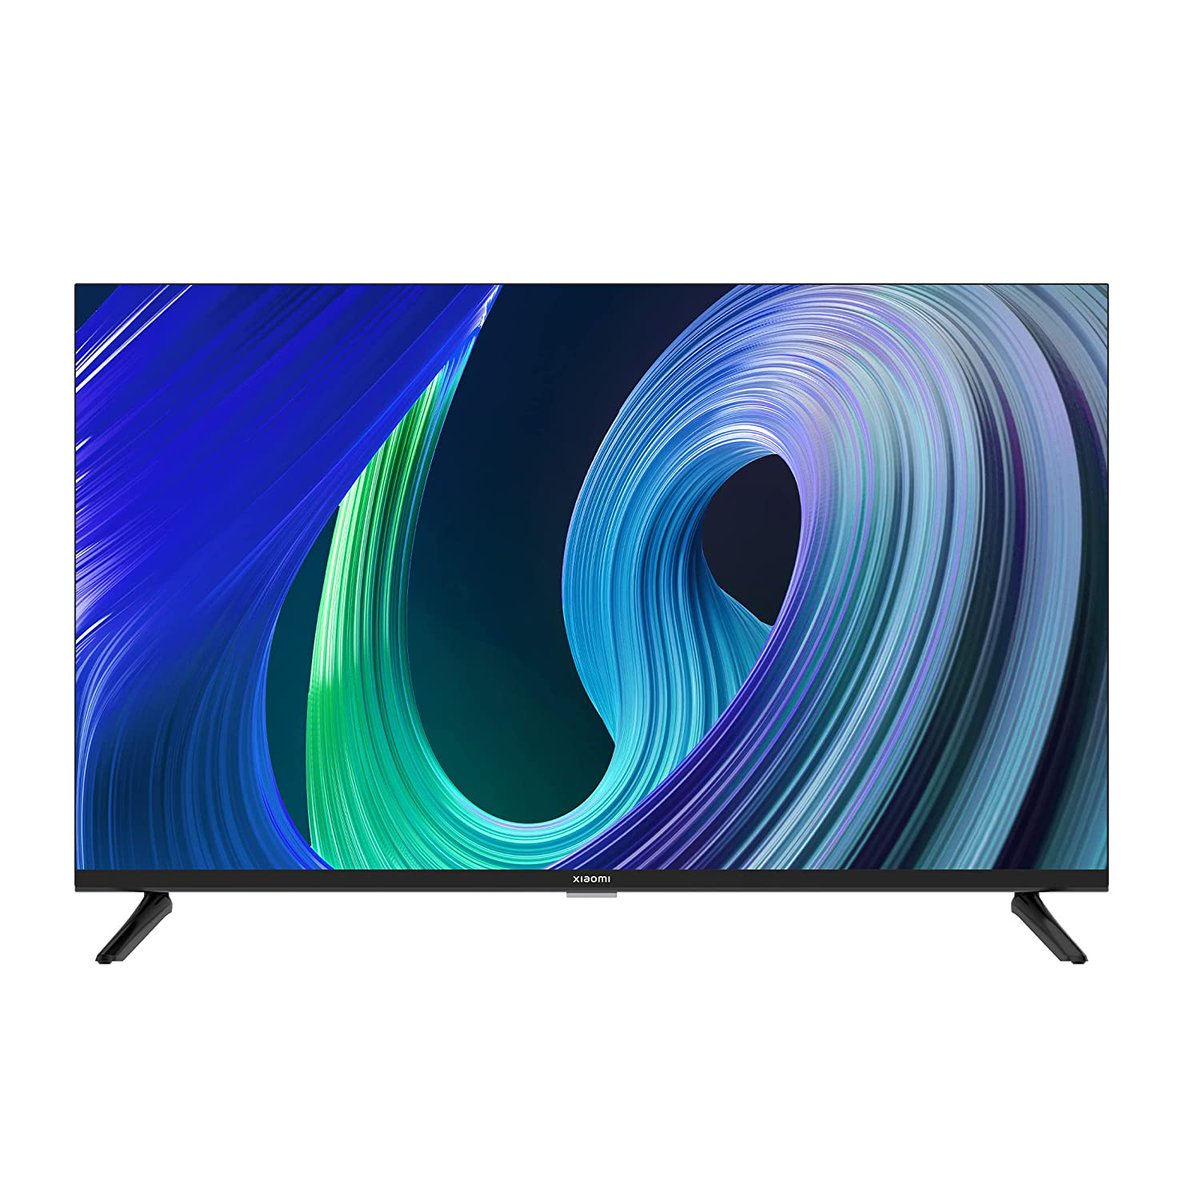 Rs 21,499 (36% off + Rs 1500 bank offer) on MI 108 cm (43 inches) 5A Series
Deal (Affiliate)- amzn.to/3KygGeZ

#deal #sale #discount #offer #mitv #smarttv #ledtv #smarthome #mitv5a #43inchtv #largescreentv #cinematv #tech #gadget #follow #india #delhi #mumbai #bengaluru